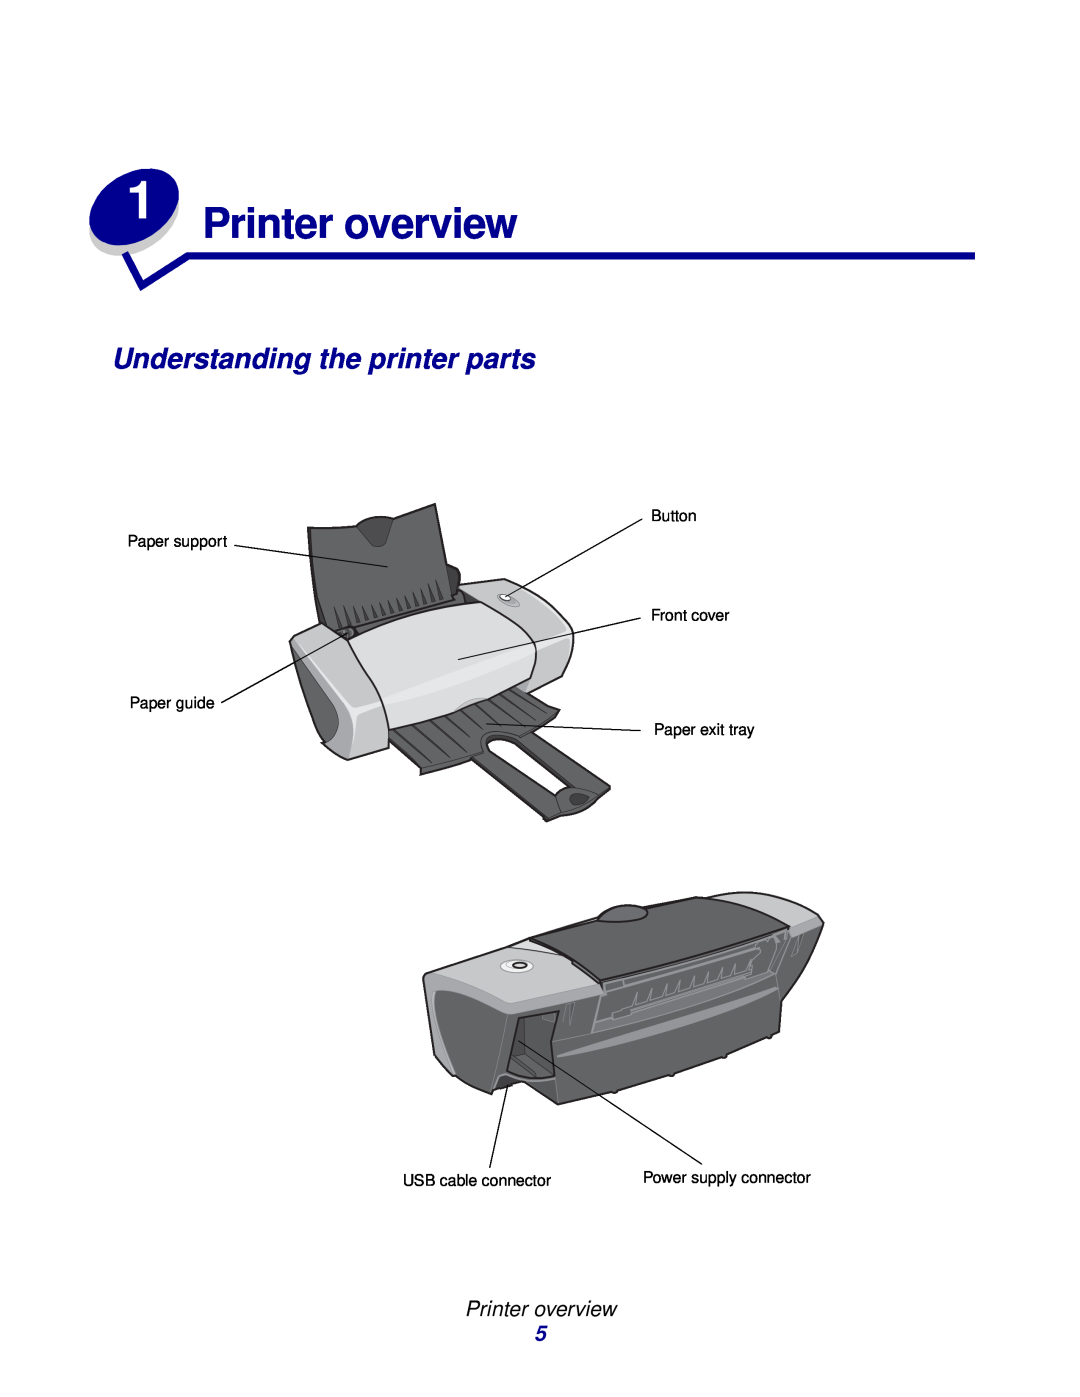 Lexmark Z600 Series manual Printer overview, Understanding the printer parts, USB cable connector 